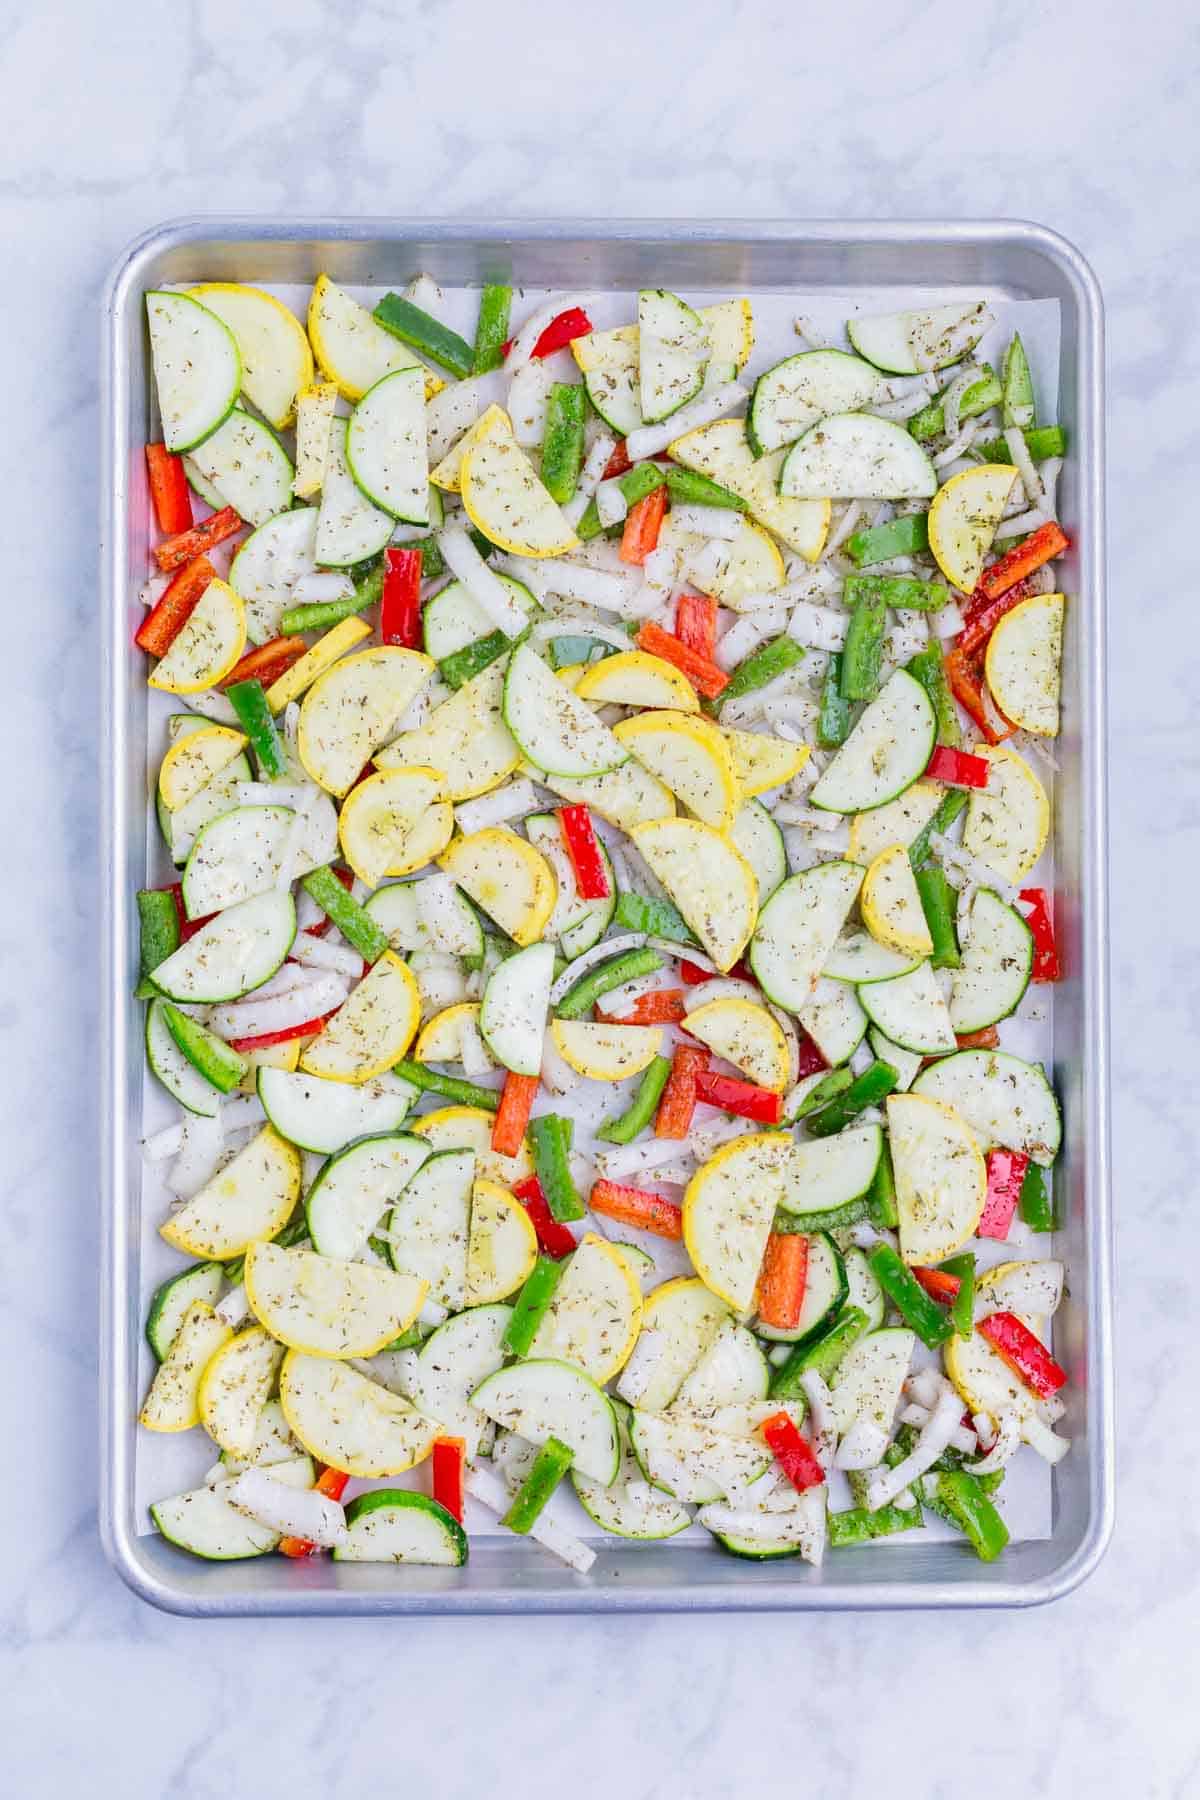 Sliced veggies are roasted on a baking tray in the oven.